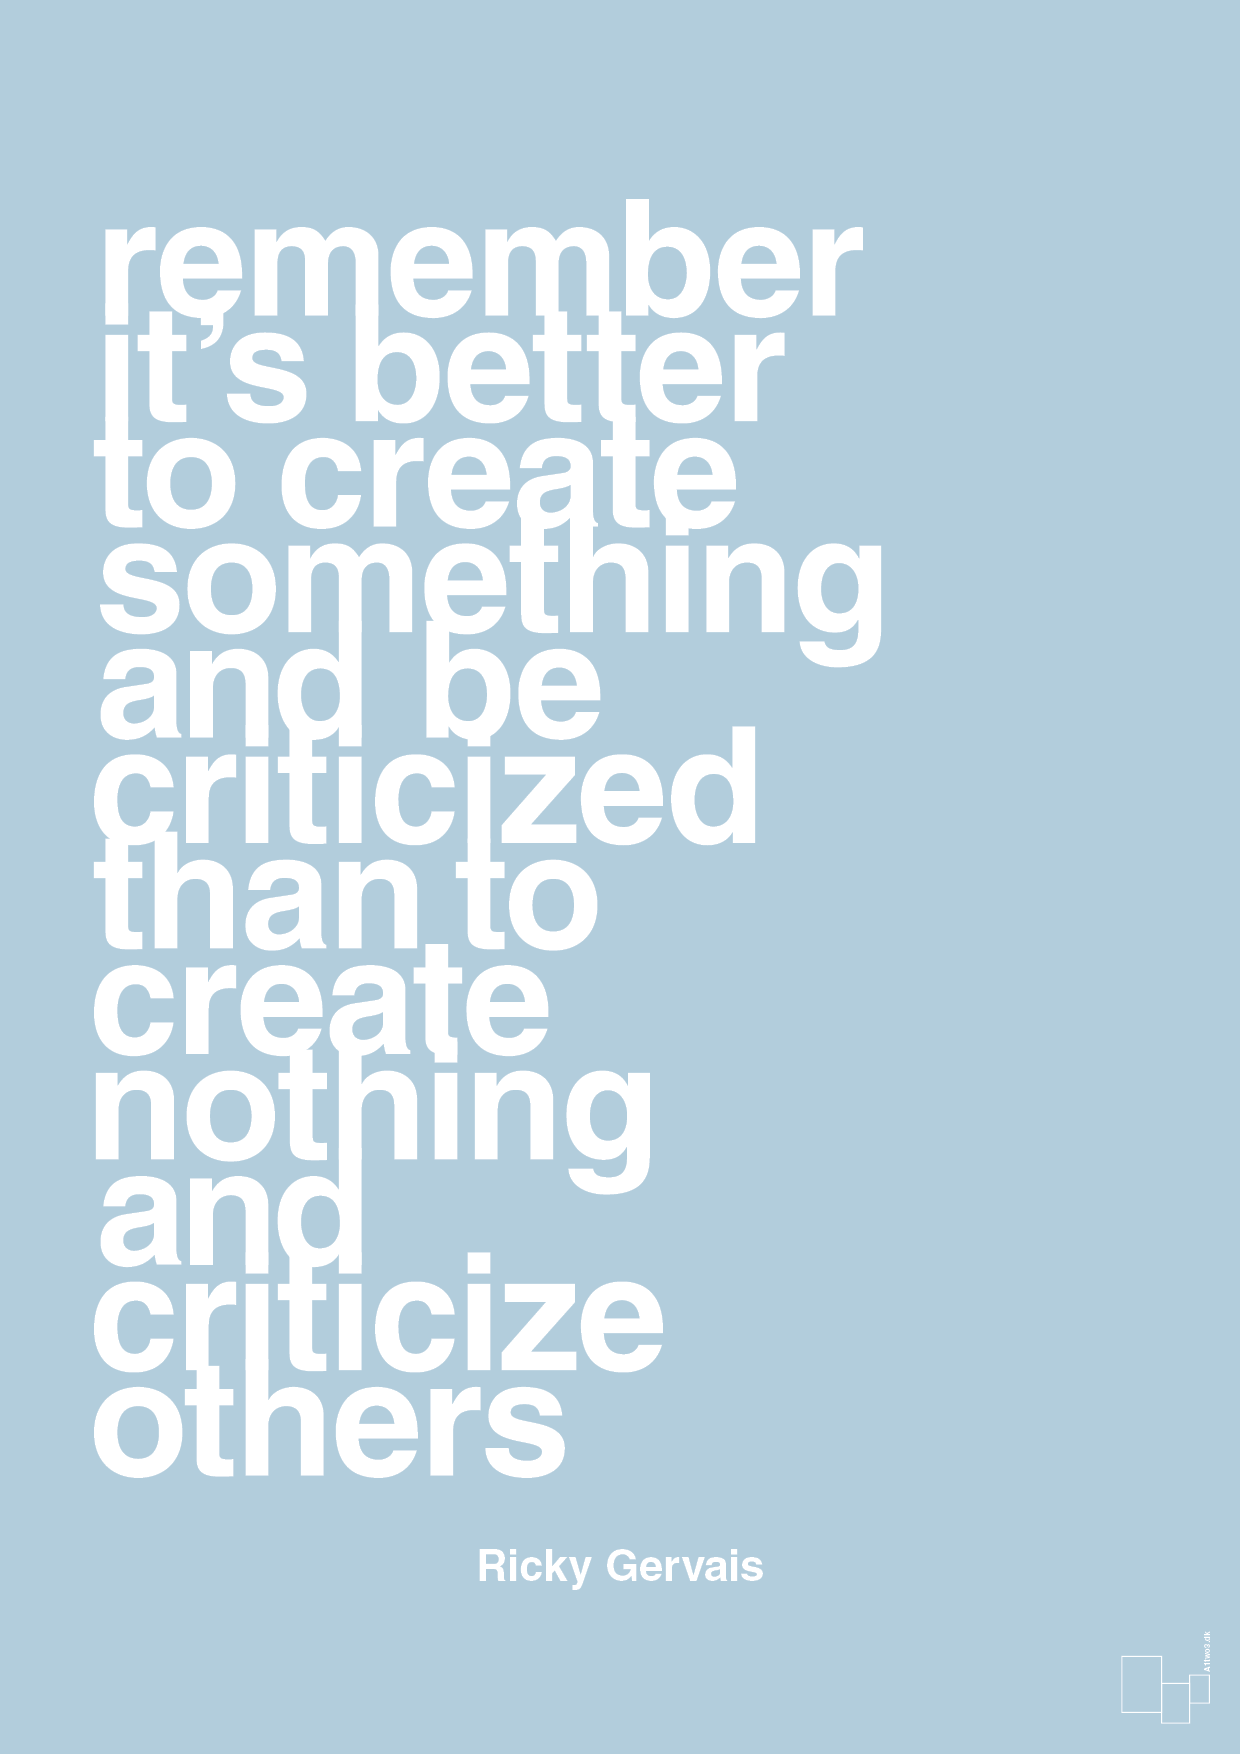 remember its better to create something and be criticized than create nothing and criticize others - Plakat med Citater i Heavenly Blue